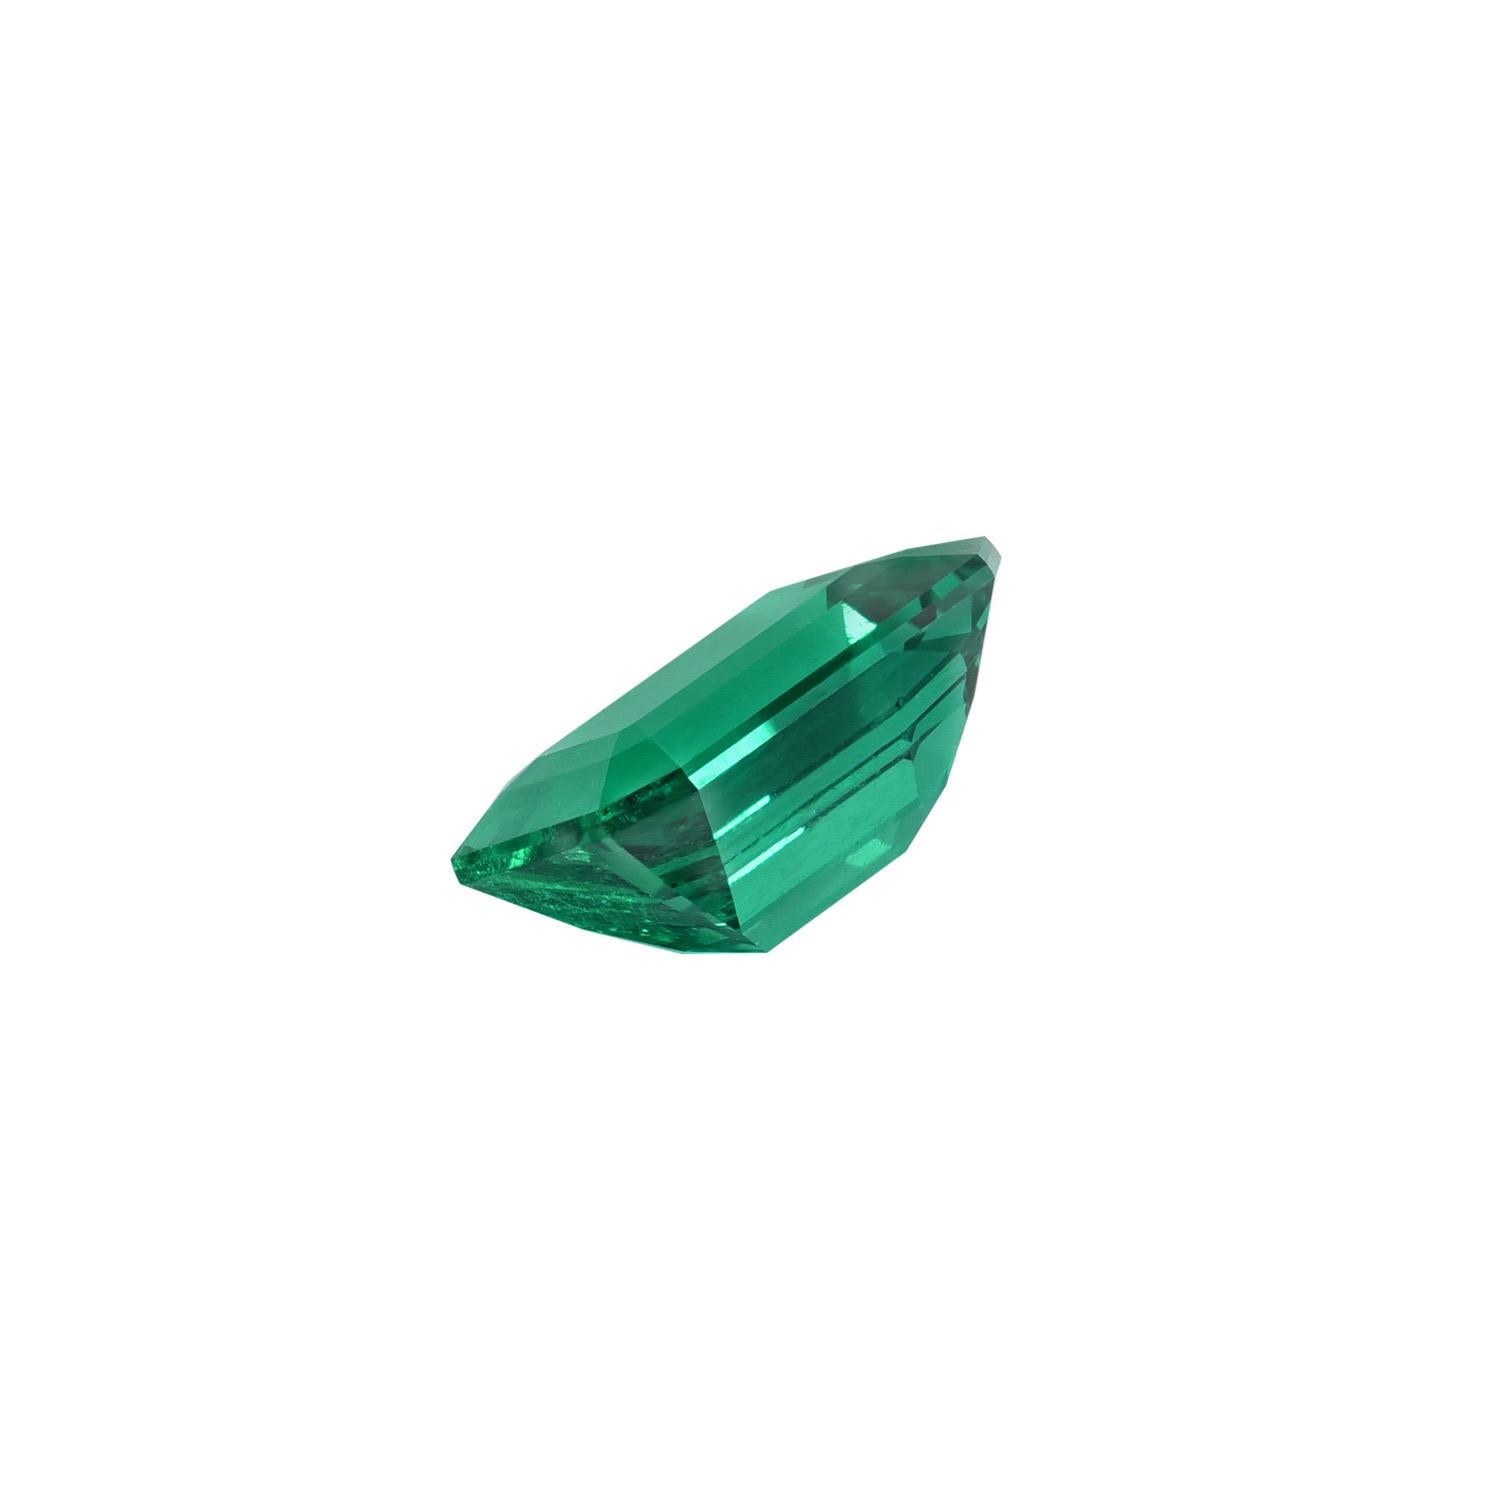 Immensely rare and highly prized Muzo Colombian Emerald 2.10 carat gem, offered unmounted to an ultra fine gemstone connoisseur. This untreated, “no oil” Emerald, is nearly “loupe clean” and it emits a coveted inner glow. 
The SSEF gem and Muzo